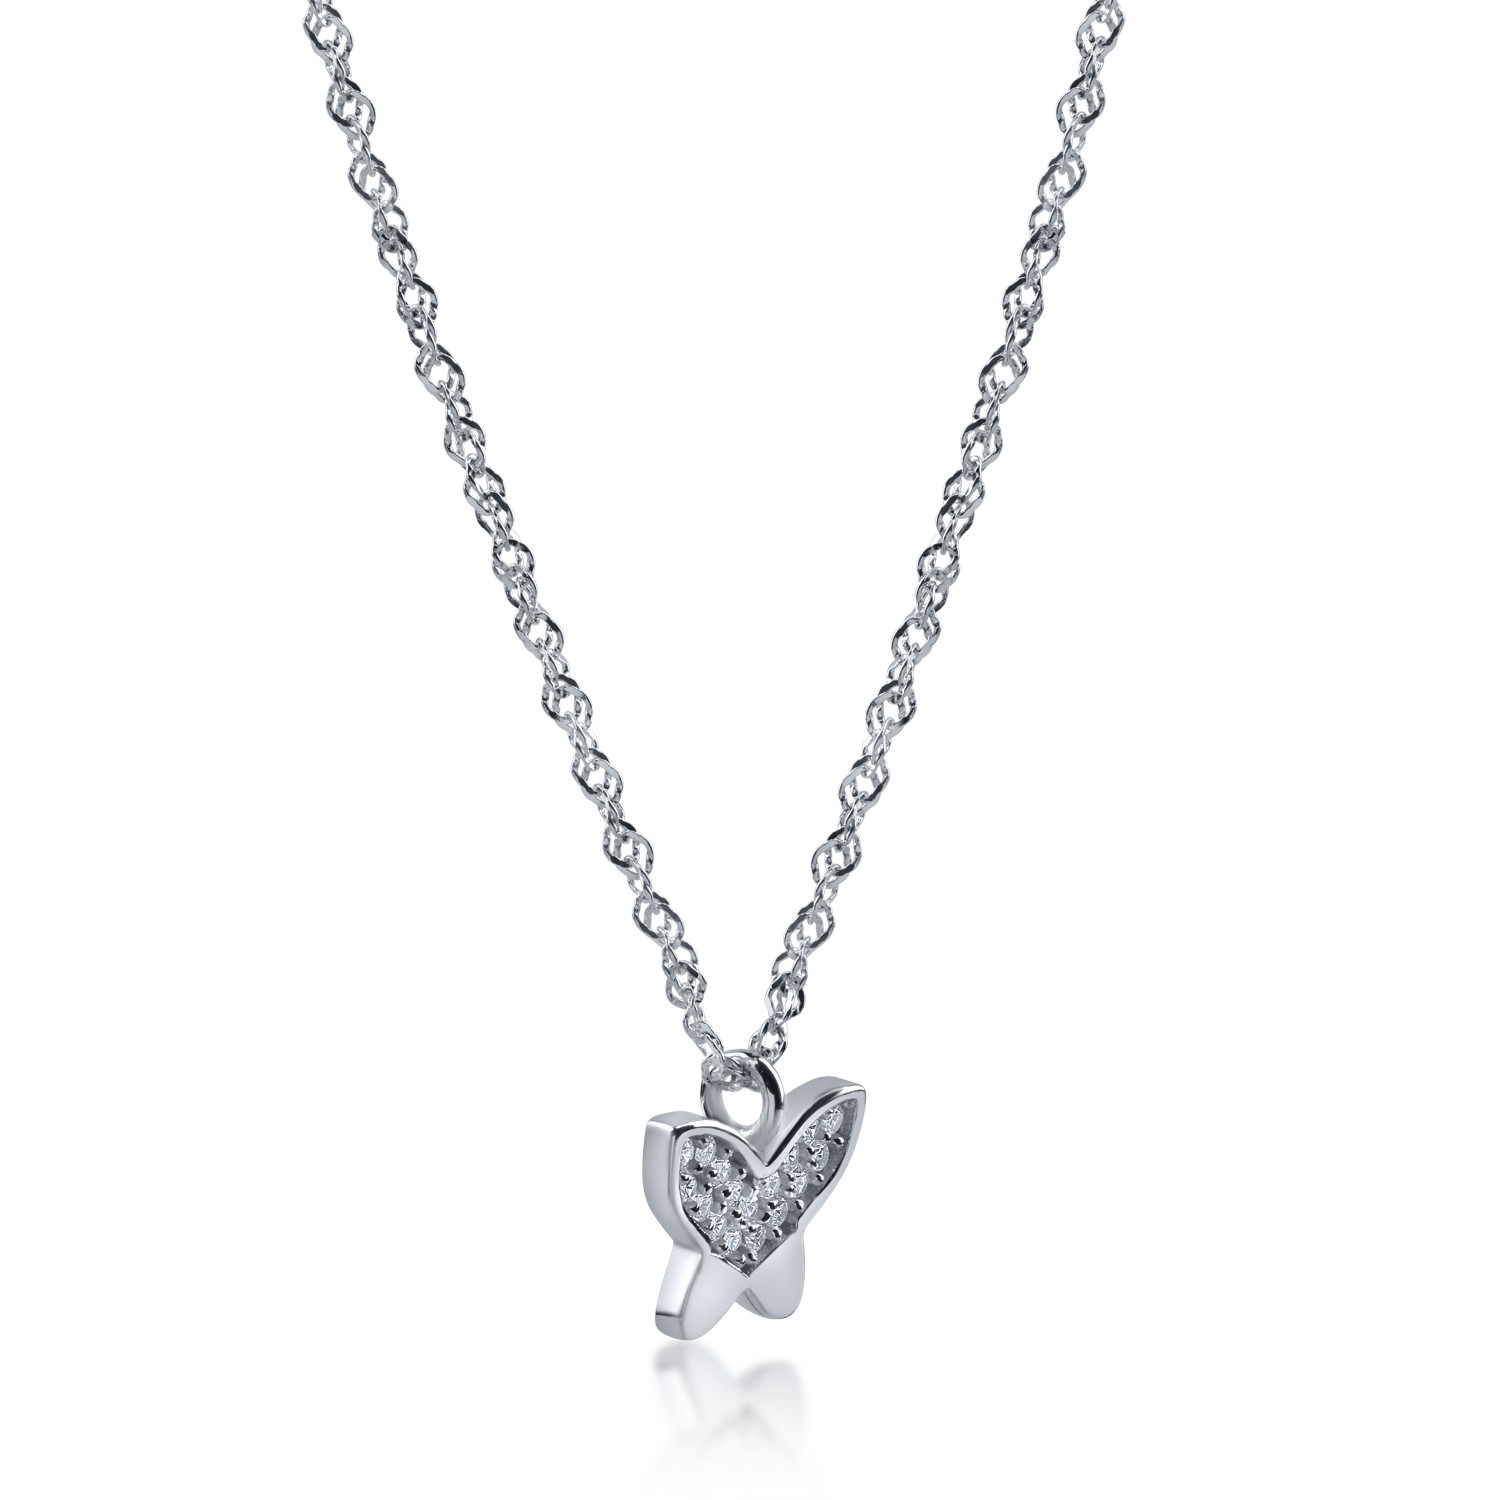 White gold butterfly pendant necklace